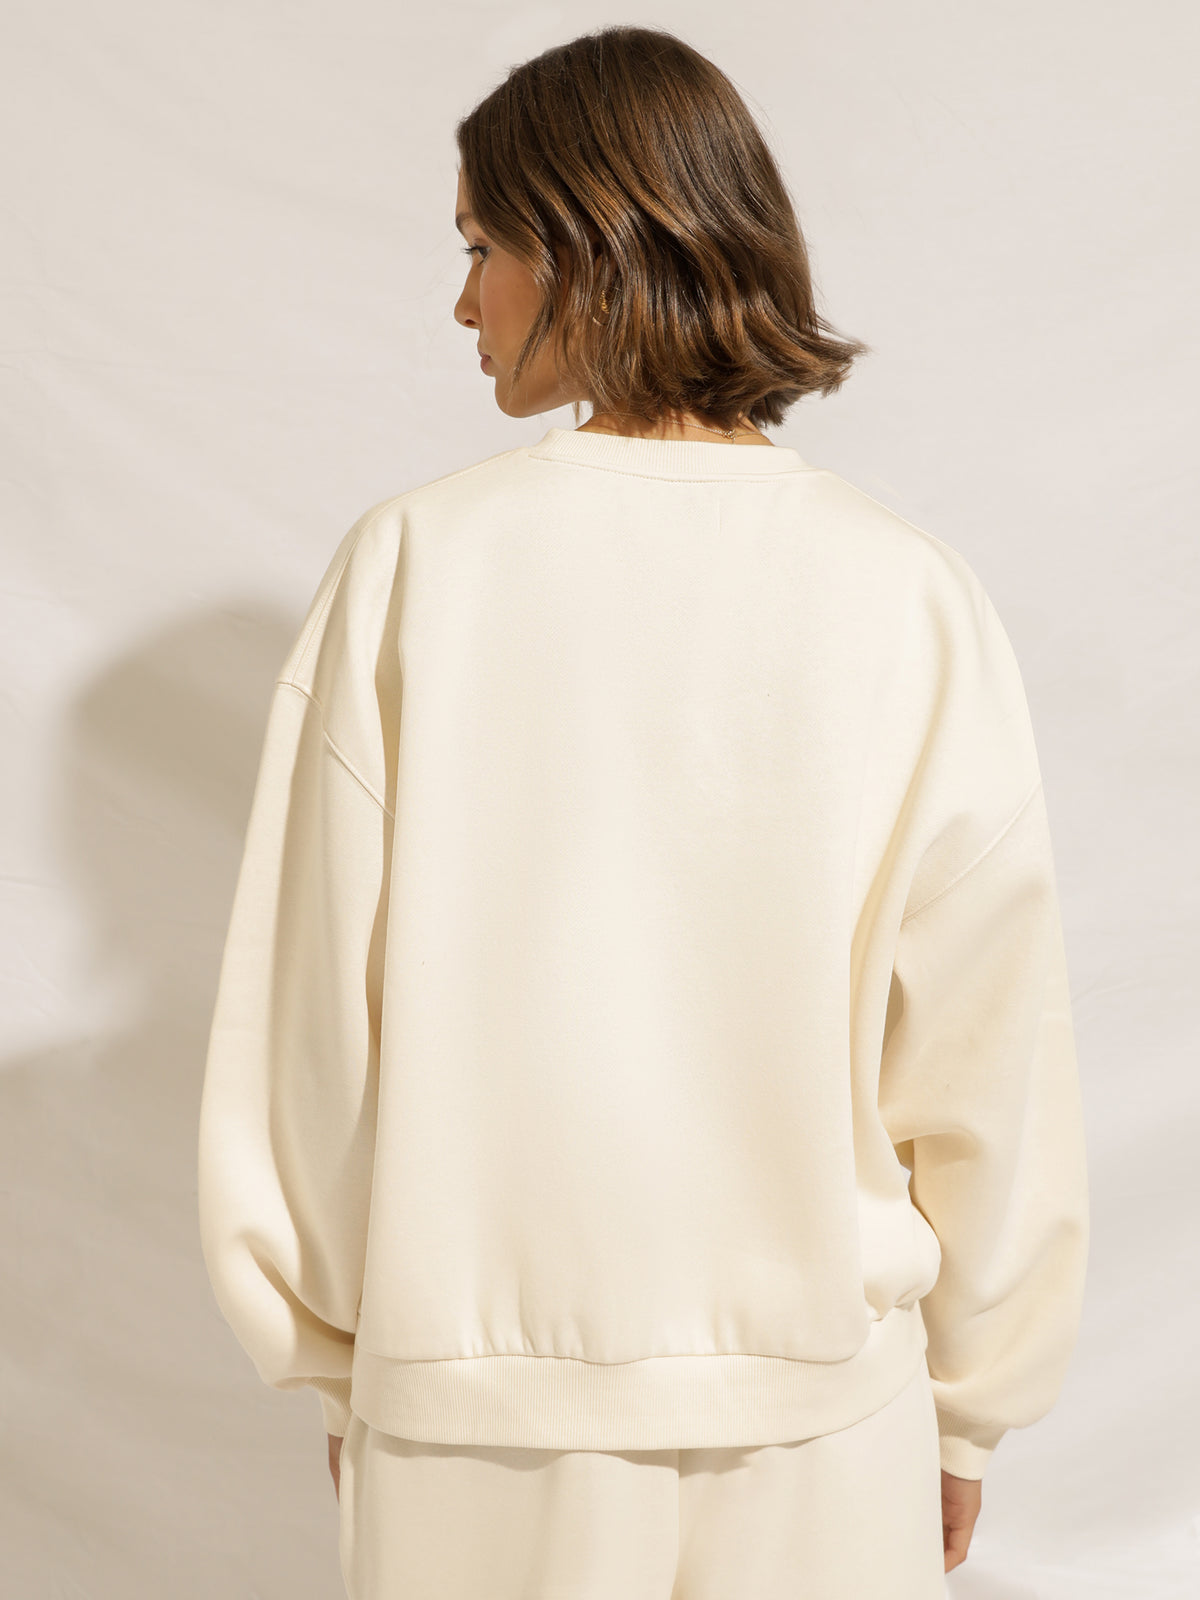 Carter Curated Sweater in Nutmeg